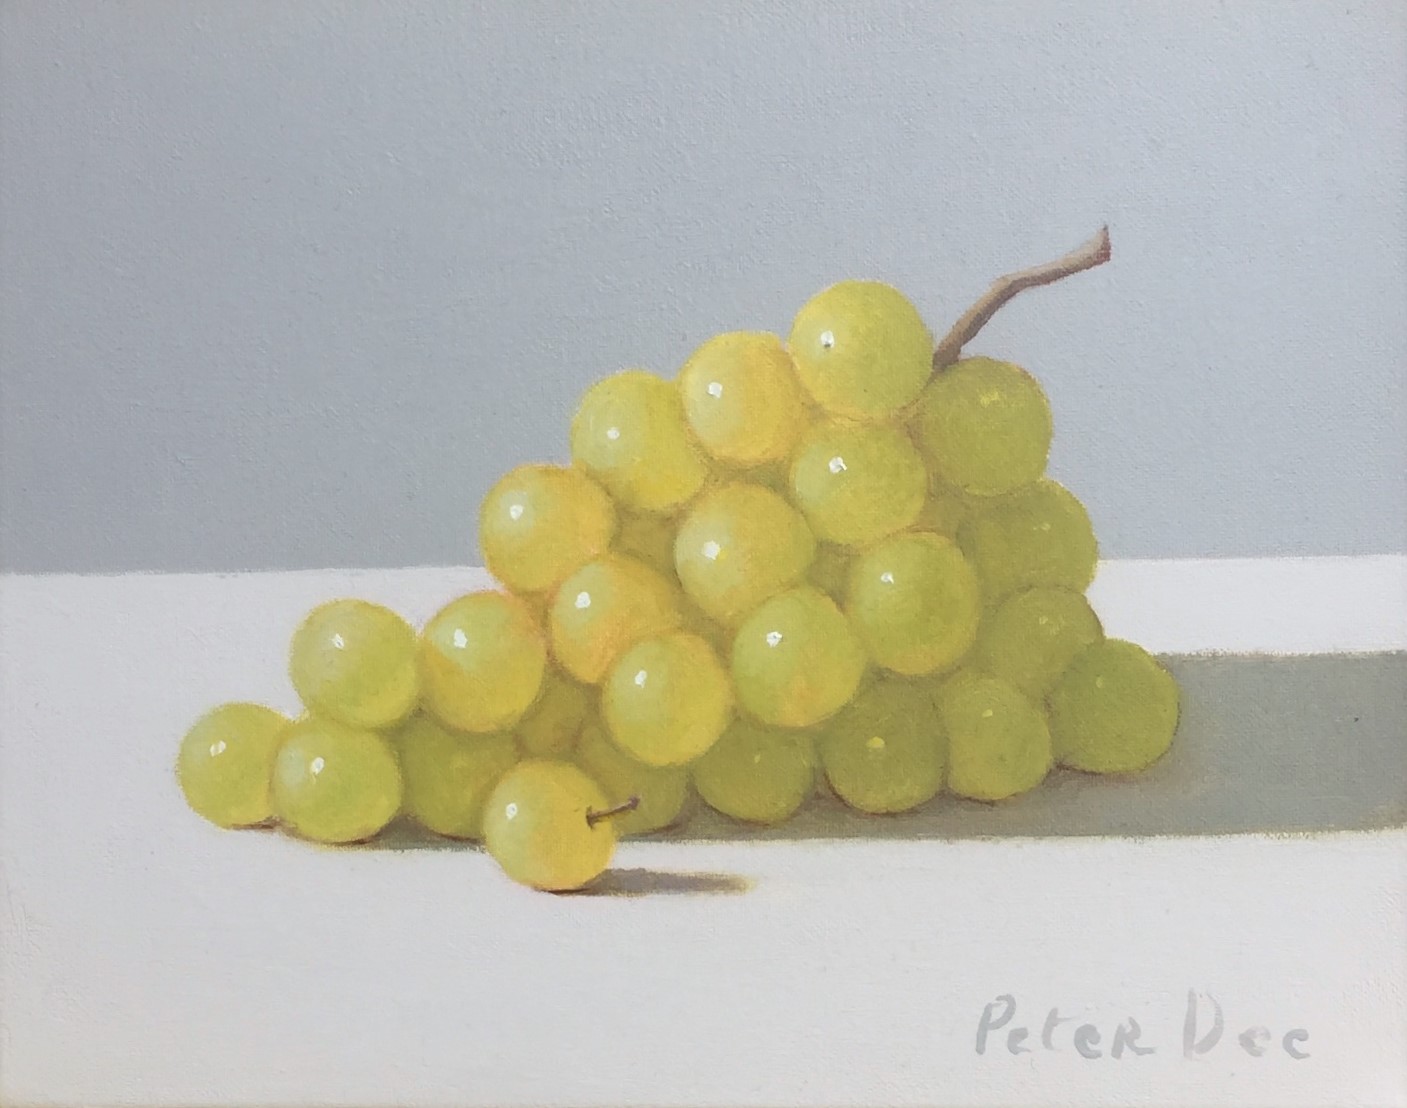 Green Grapes by Peter Dee